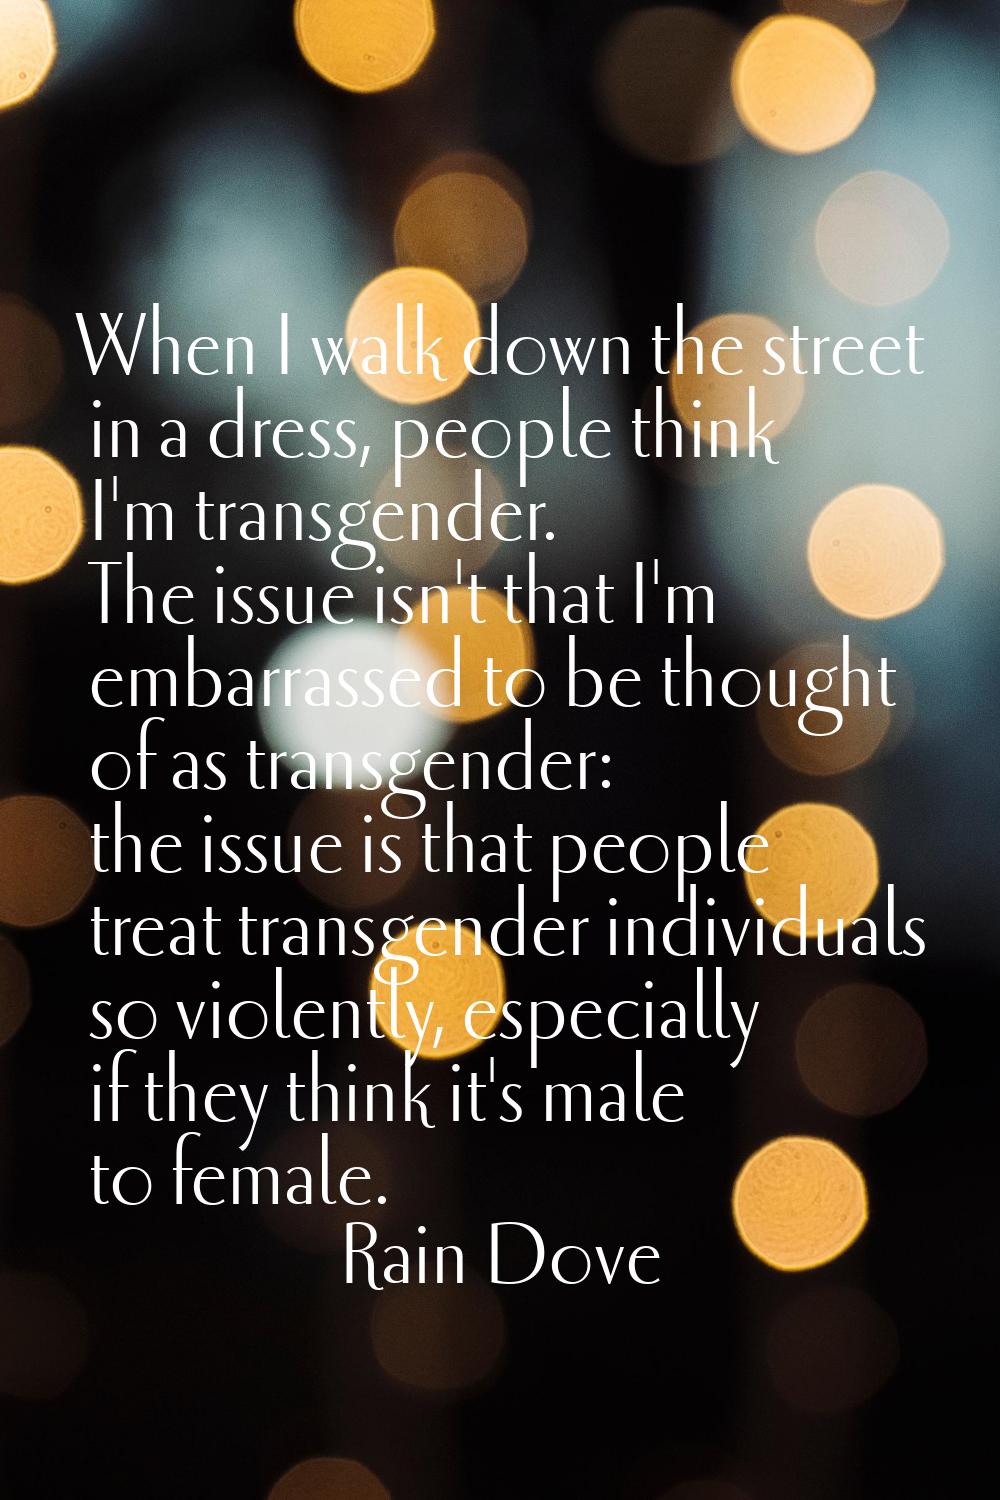 When I walk down the street in a dress, people think I'm transgender. The issue isn't that I'm emba